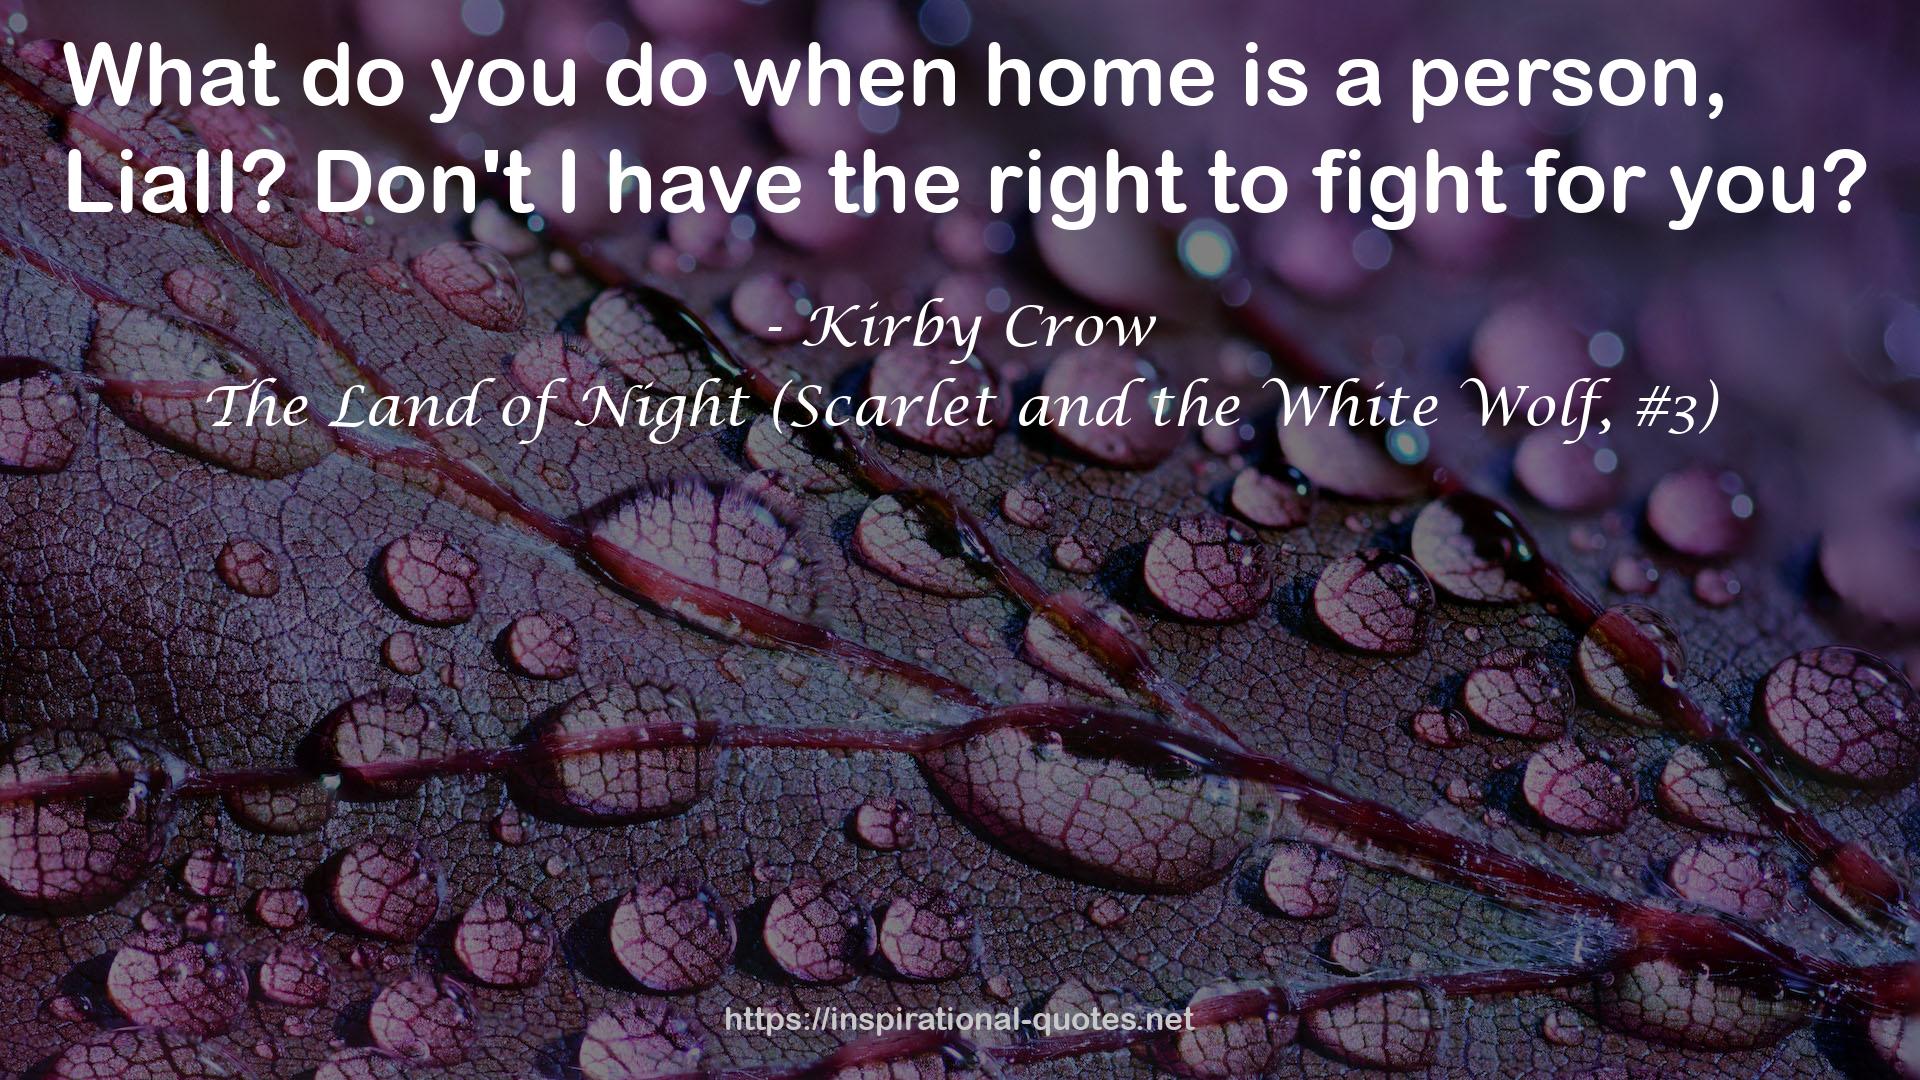 The Land of Night (Scarlet and the White Wolf, #3) QUOTES